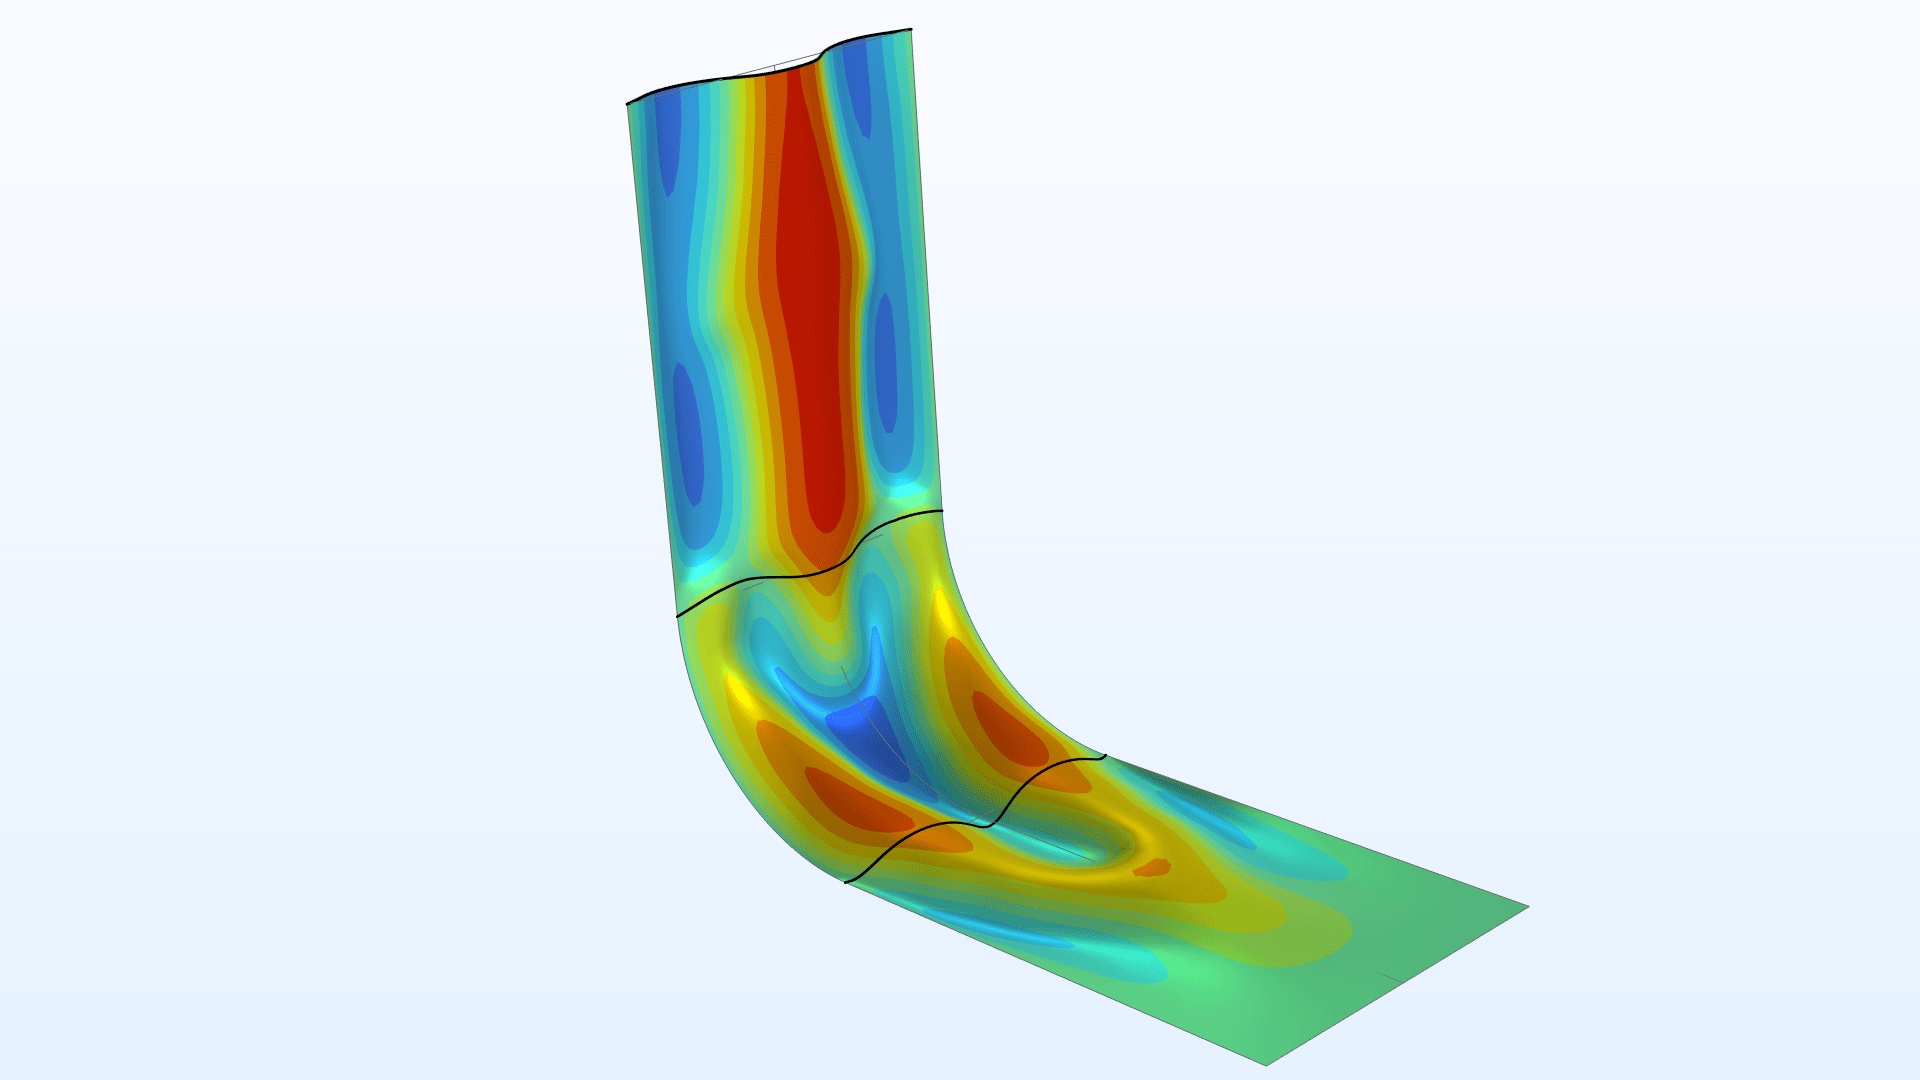 A shell model showing displacement in the Rainbow color table.